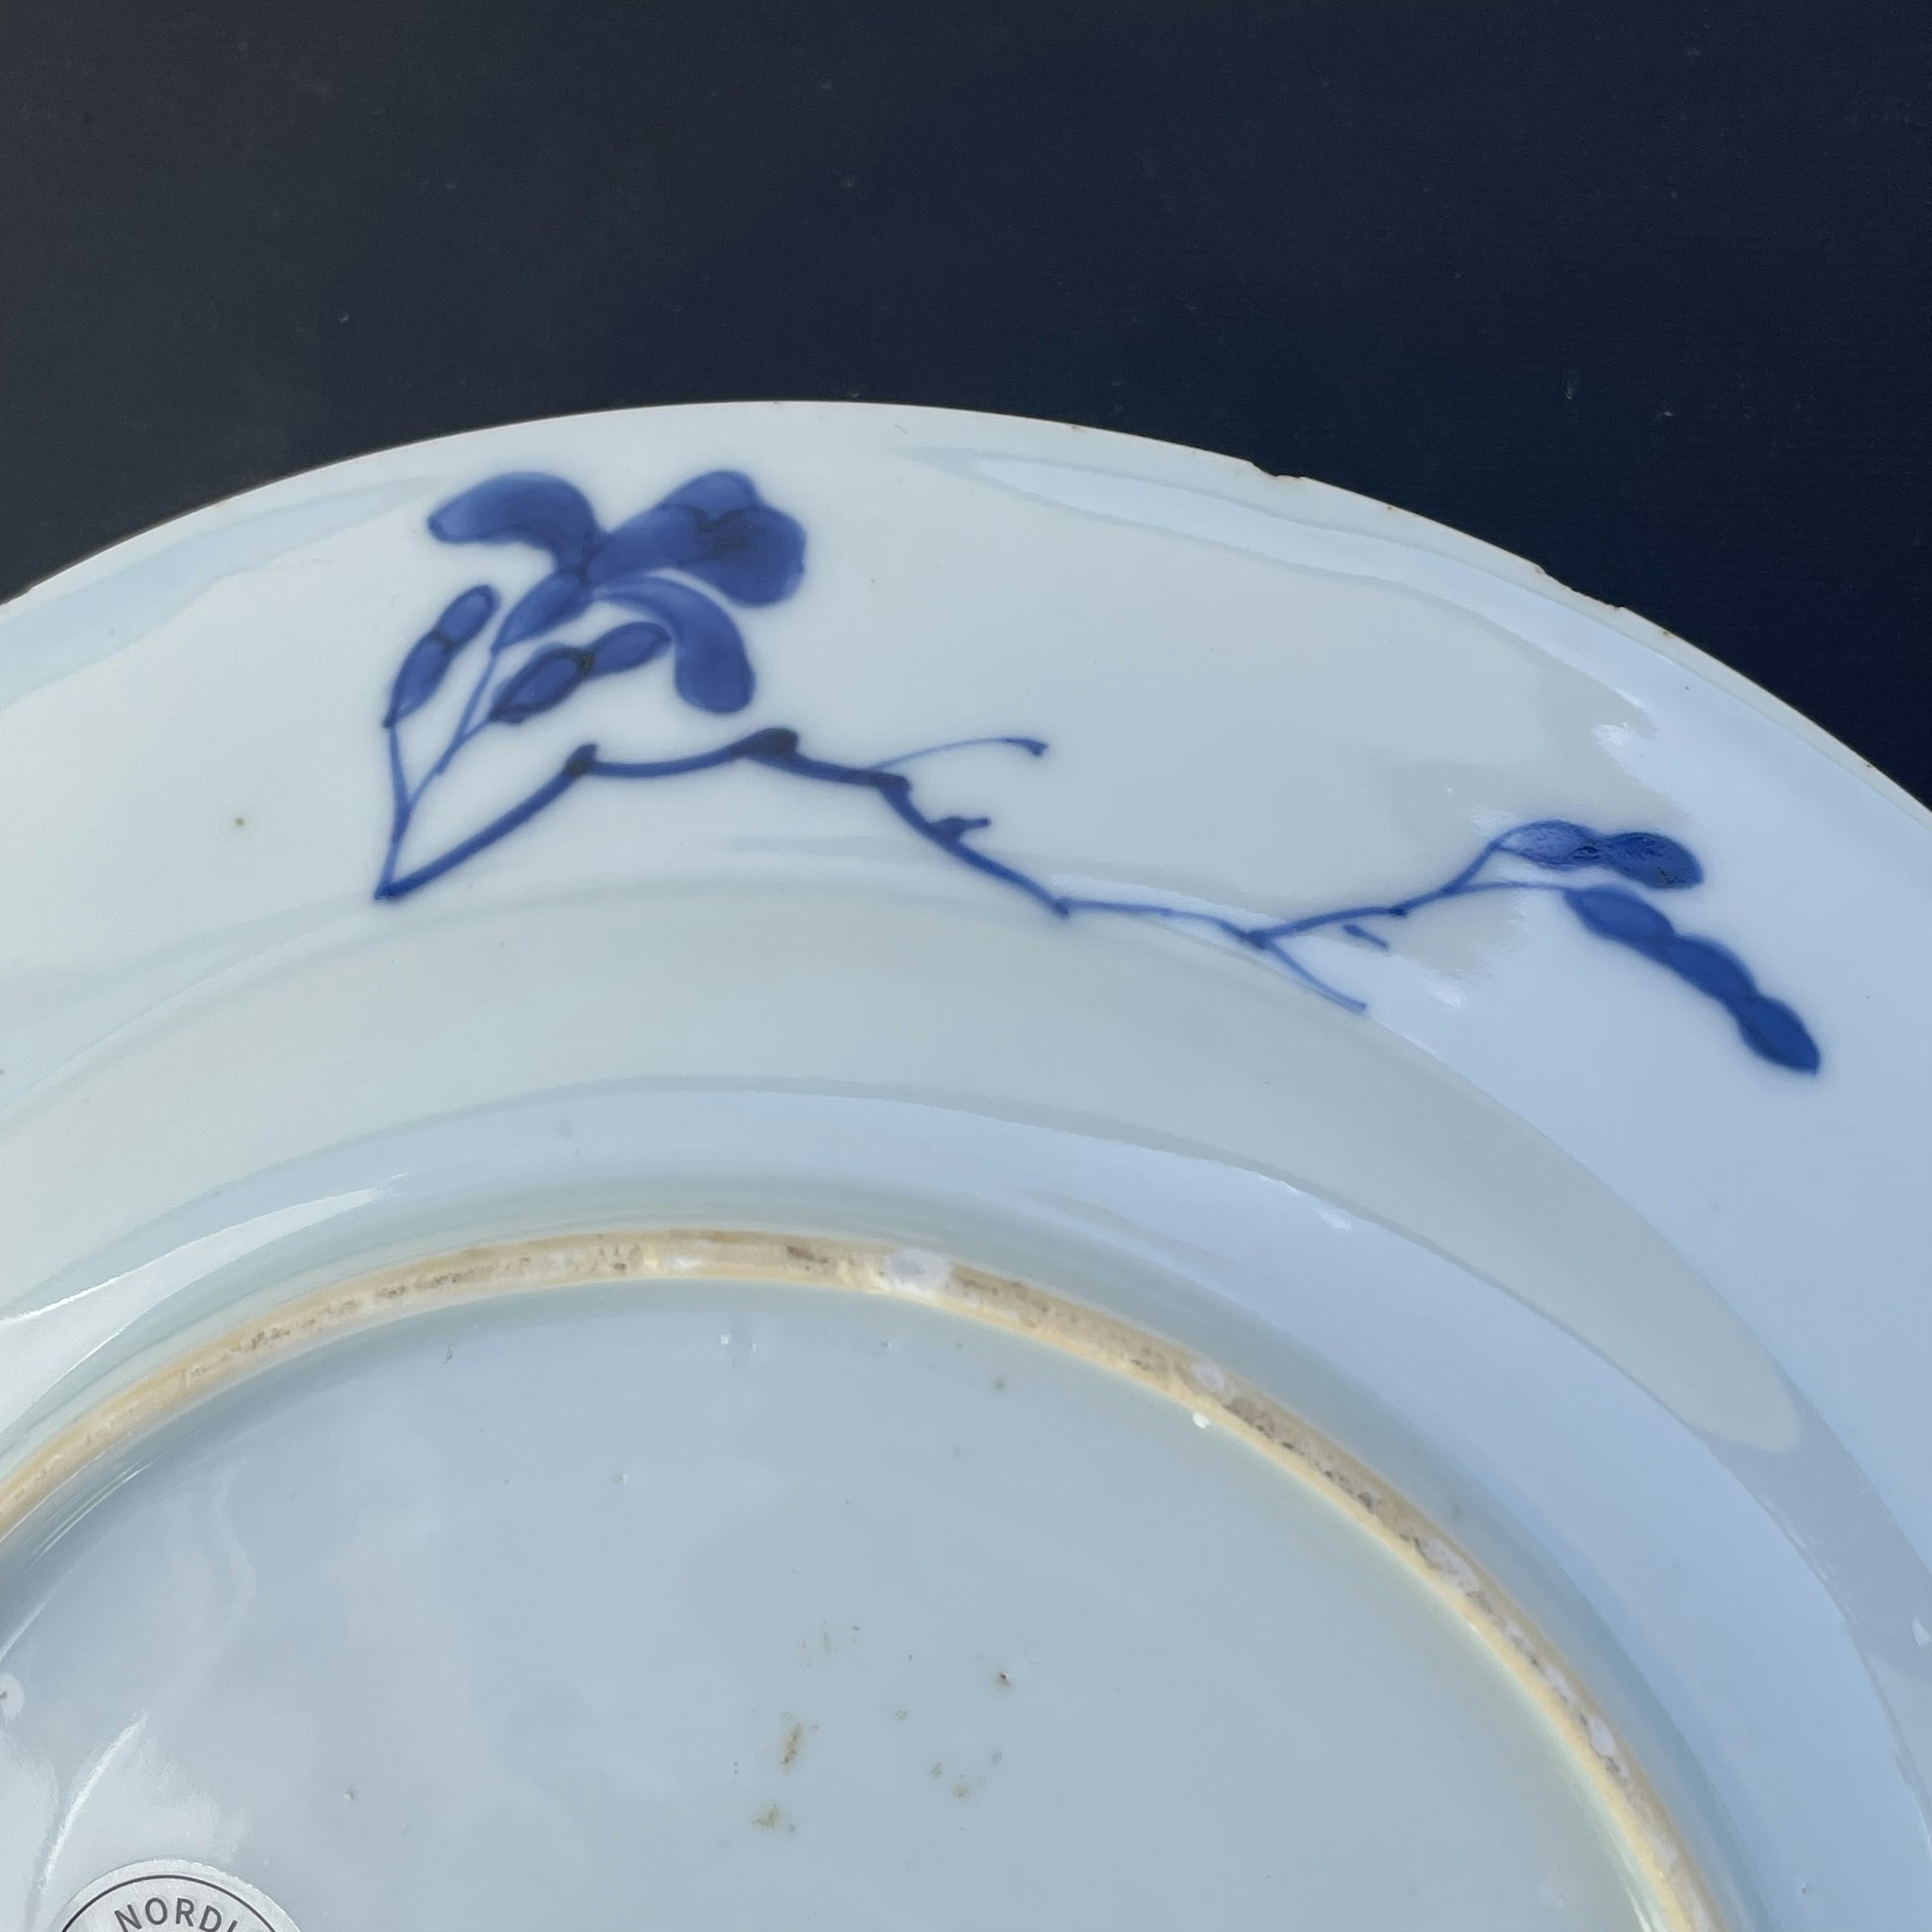 Chinese Antique Porcelain Blue and White Plate, Kangxi period #1920